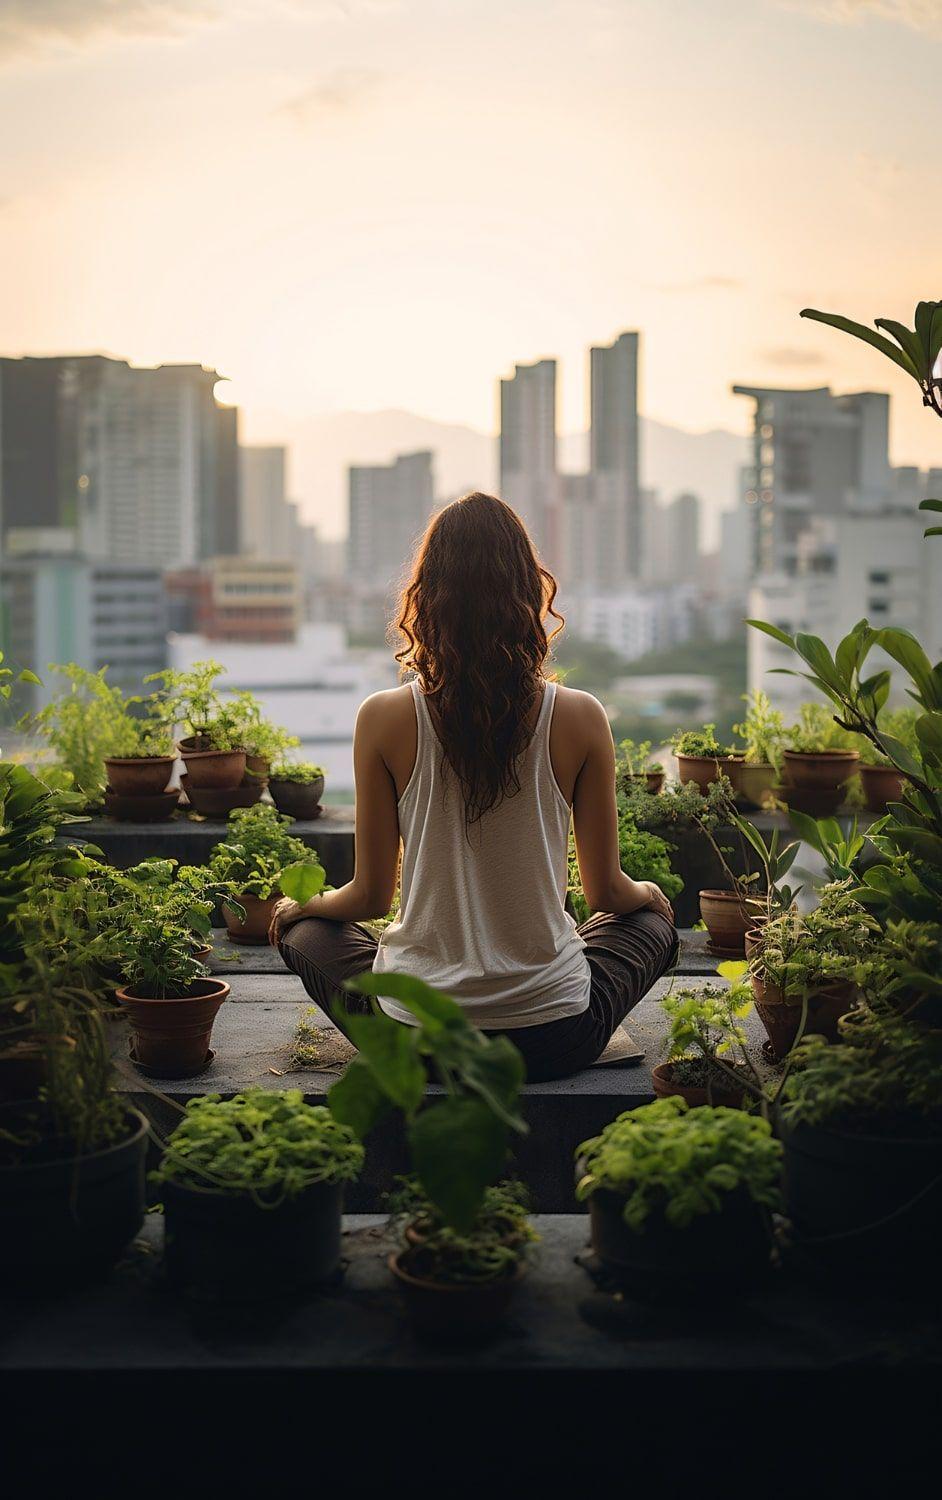 Radiant Well-Being: 10 Inspiring Self-Care Ideas to Nourish Your Mind, Body, and Soul